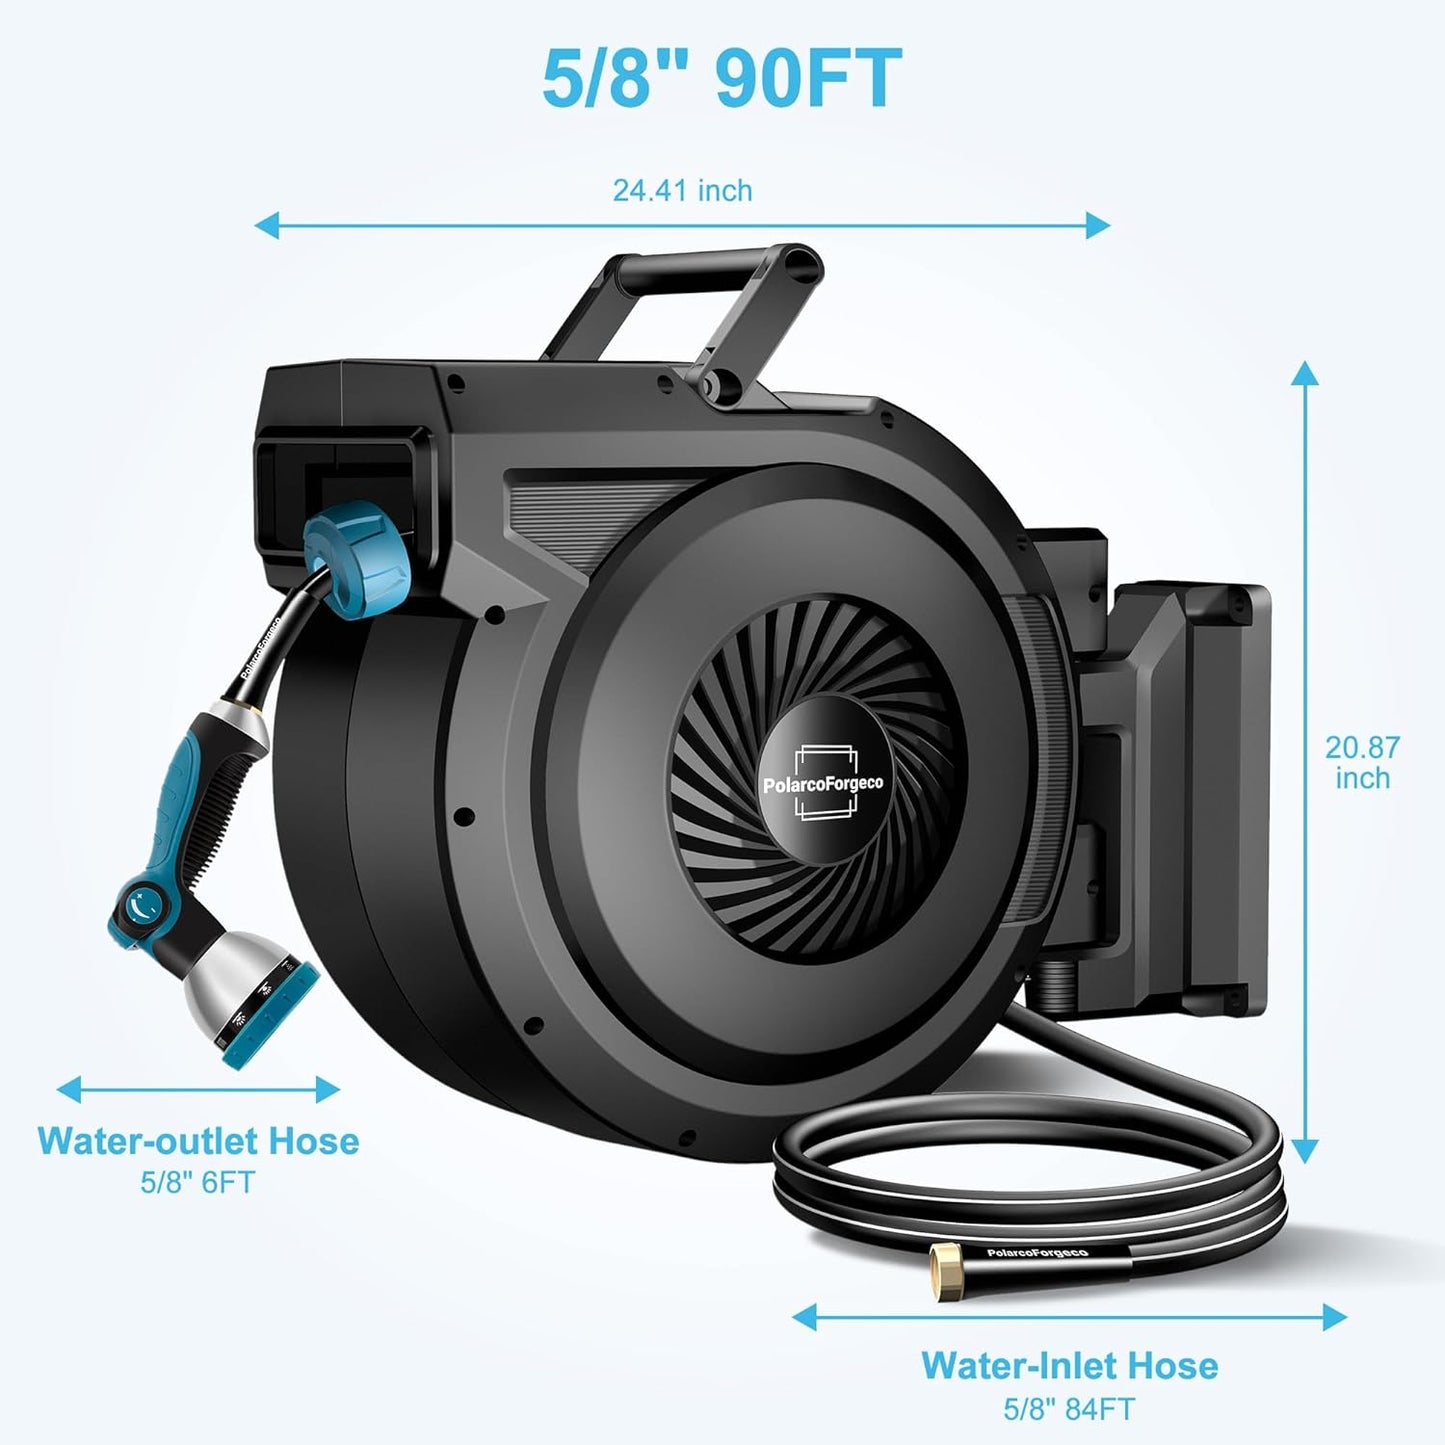 Retractable Garden Hose Reel - 5/8 inch x 90 ft Wall Mounted Hose Reel with 10 Pattern Nozzle & Any Length Lock, Heavy Duty Water Hose Supports Automatic Rewind & 180° Swivel, Black